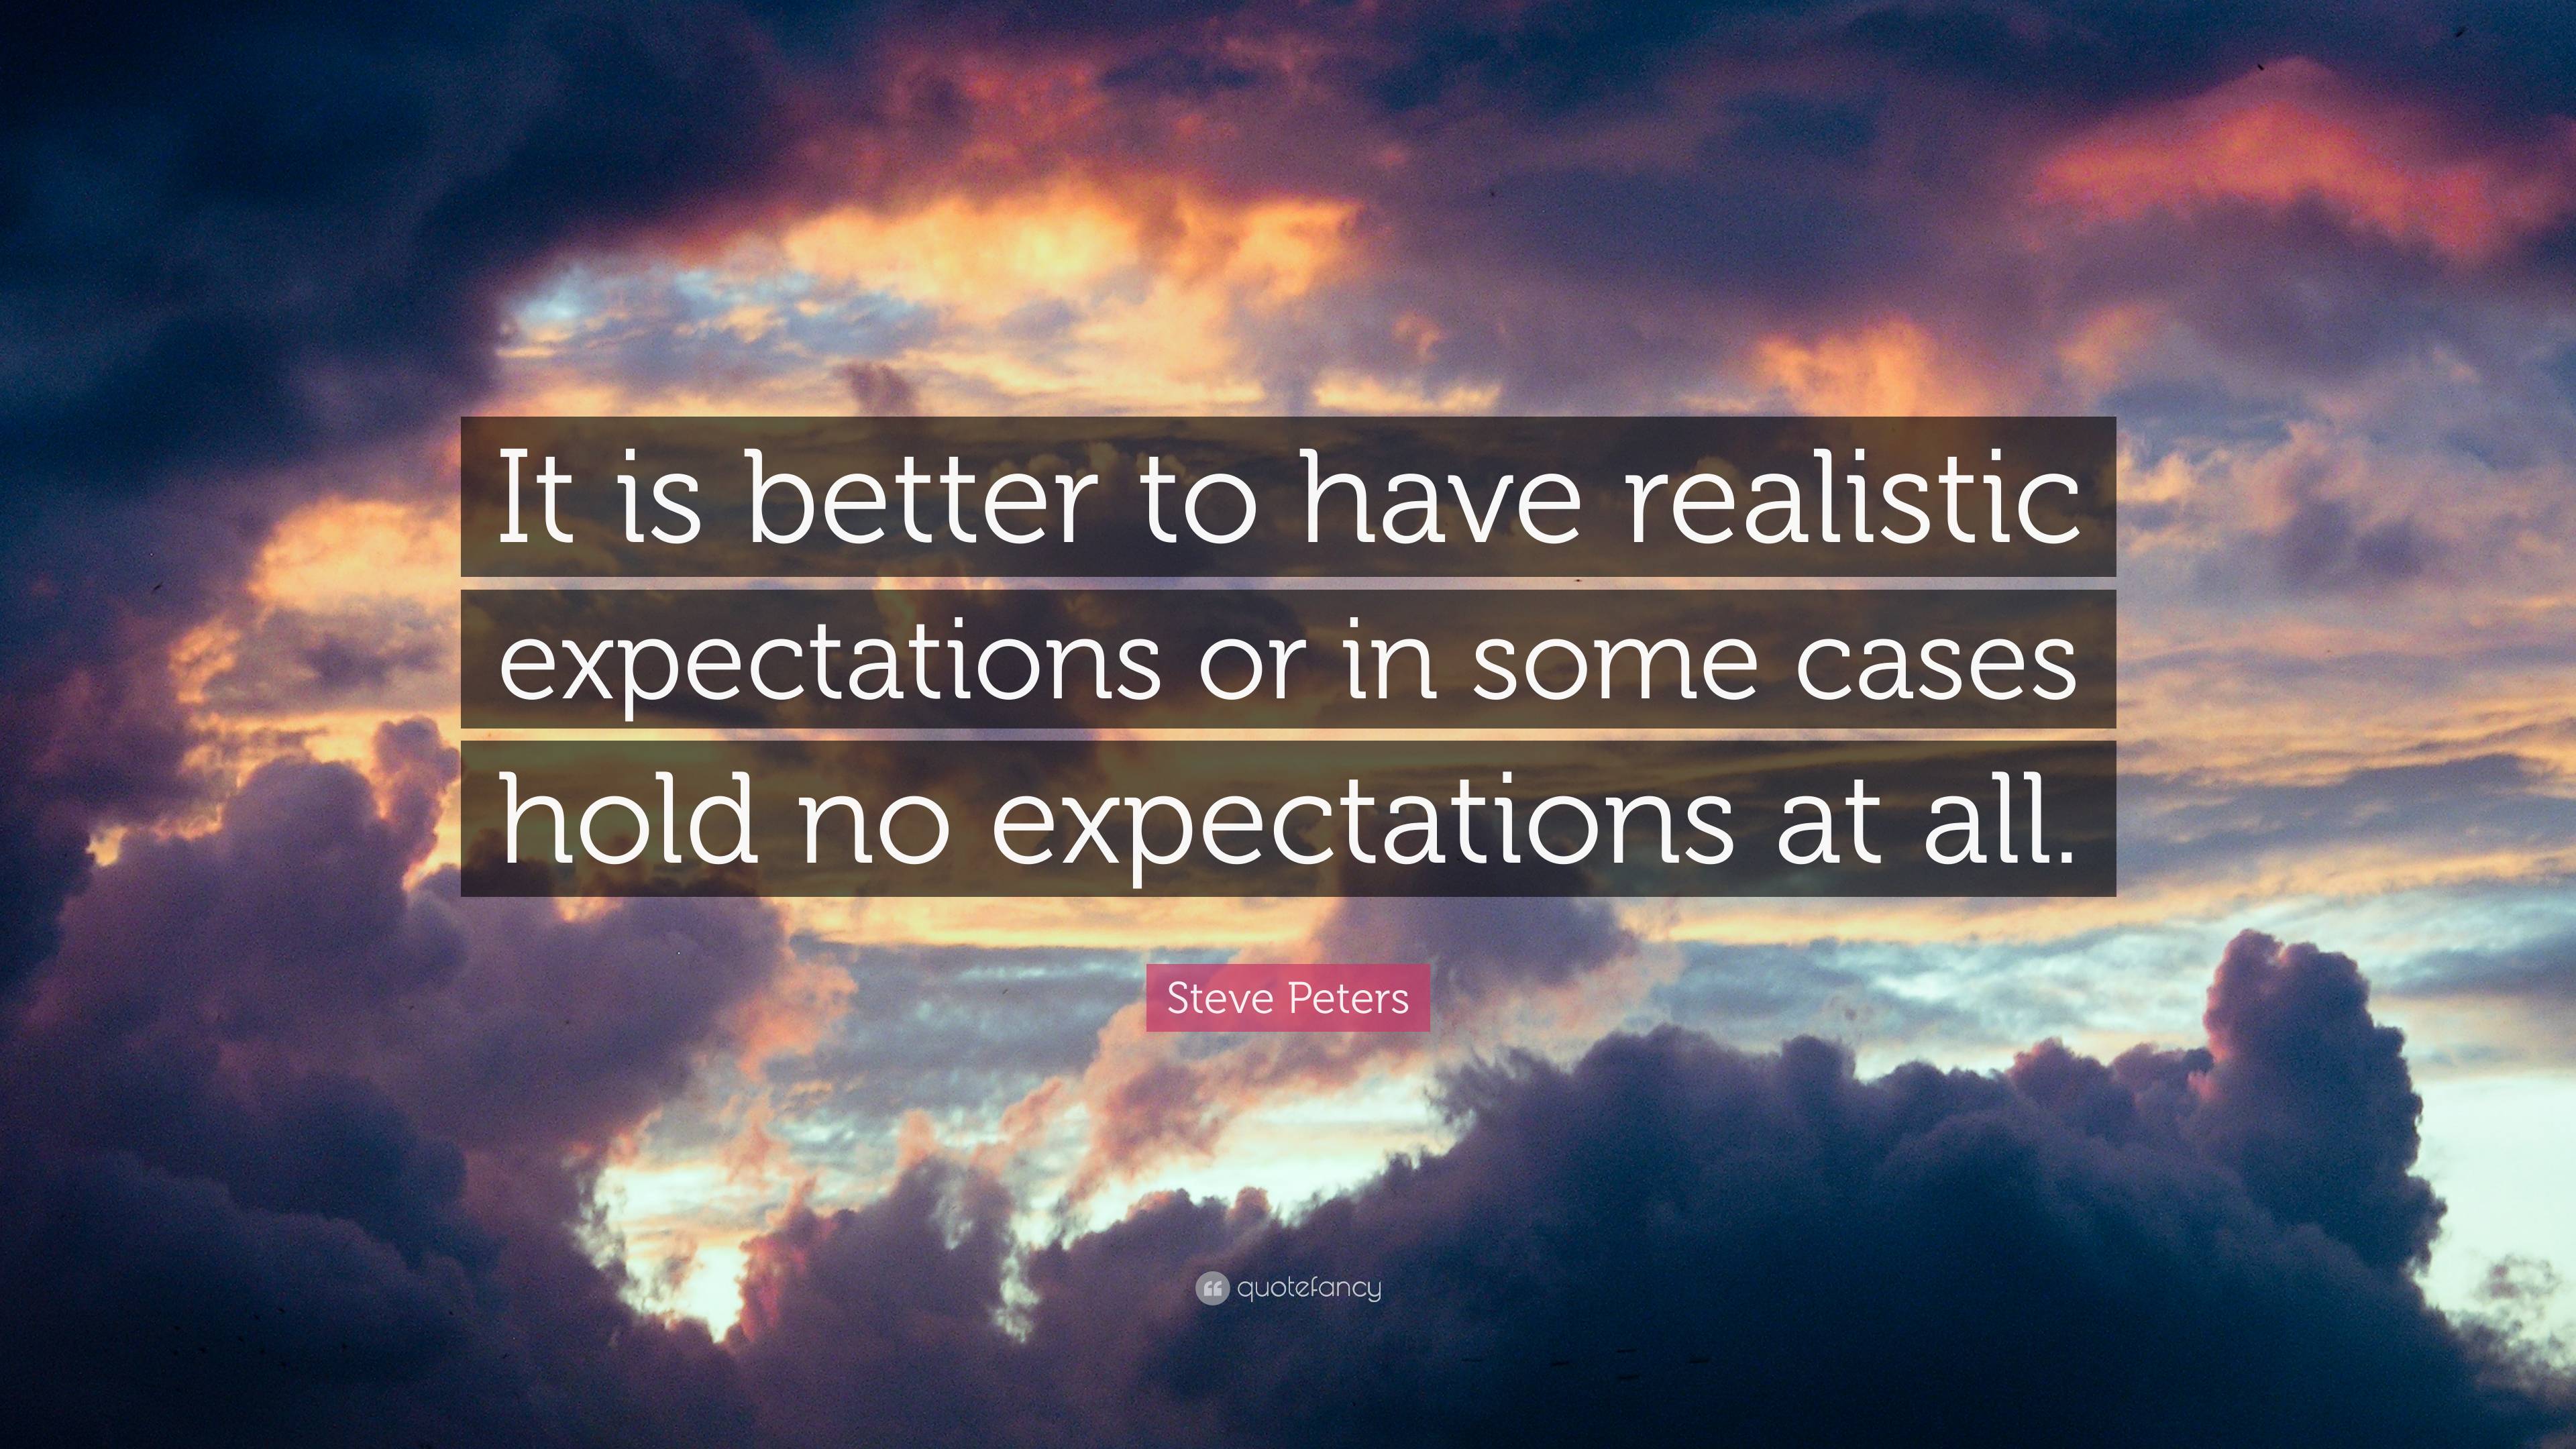 Steve Peters Quote “it Is Better To Have Realistic Expectations Or In